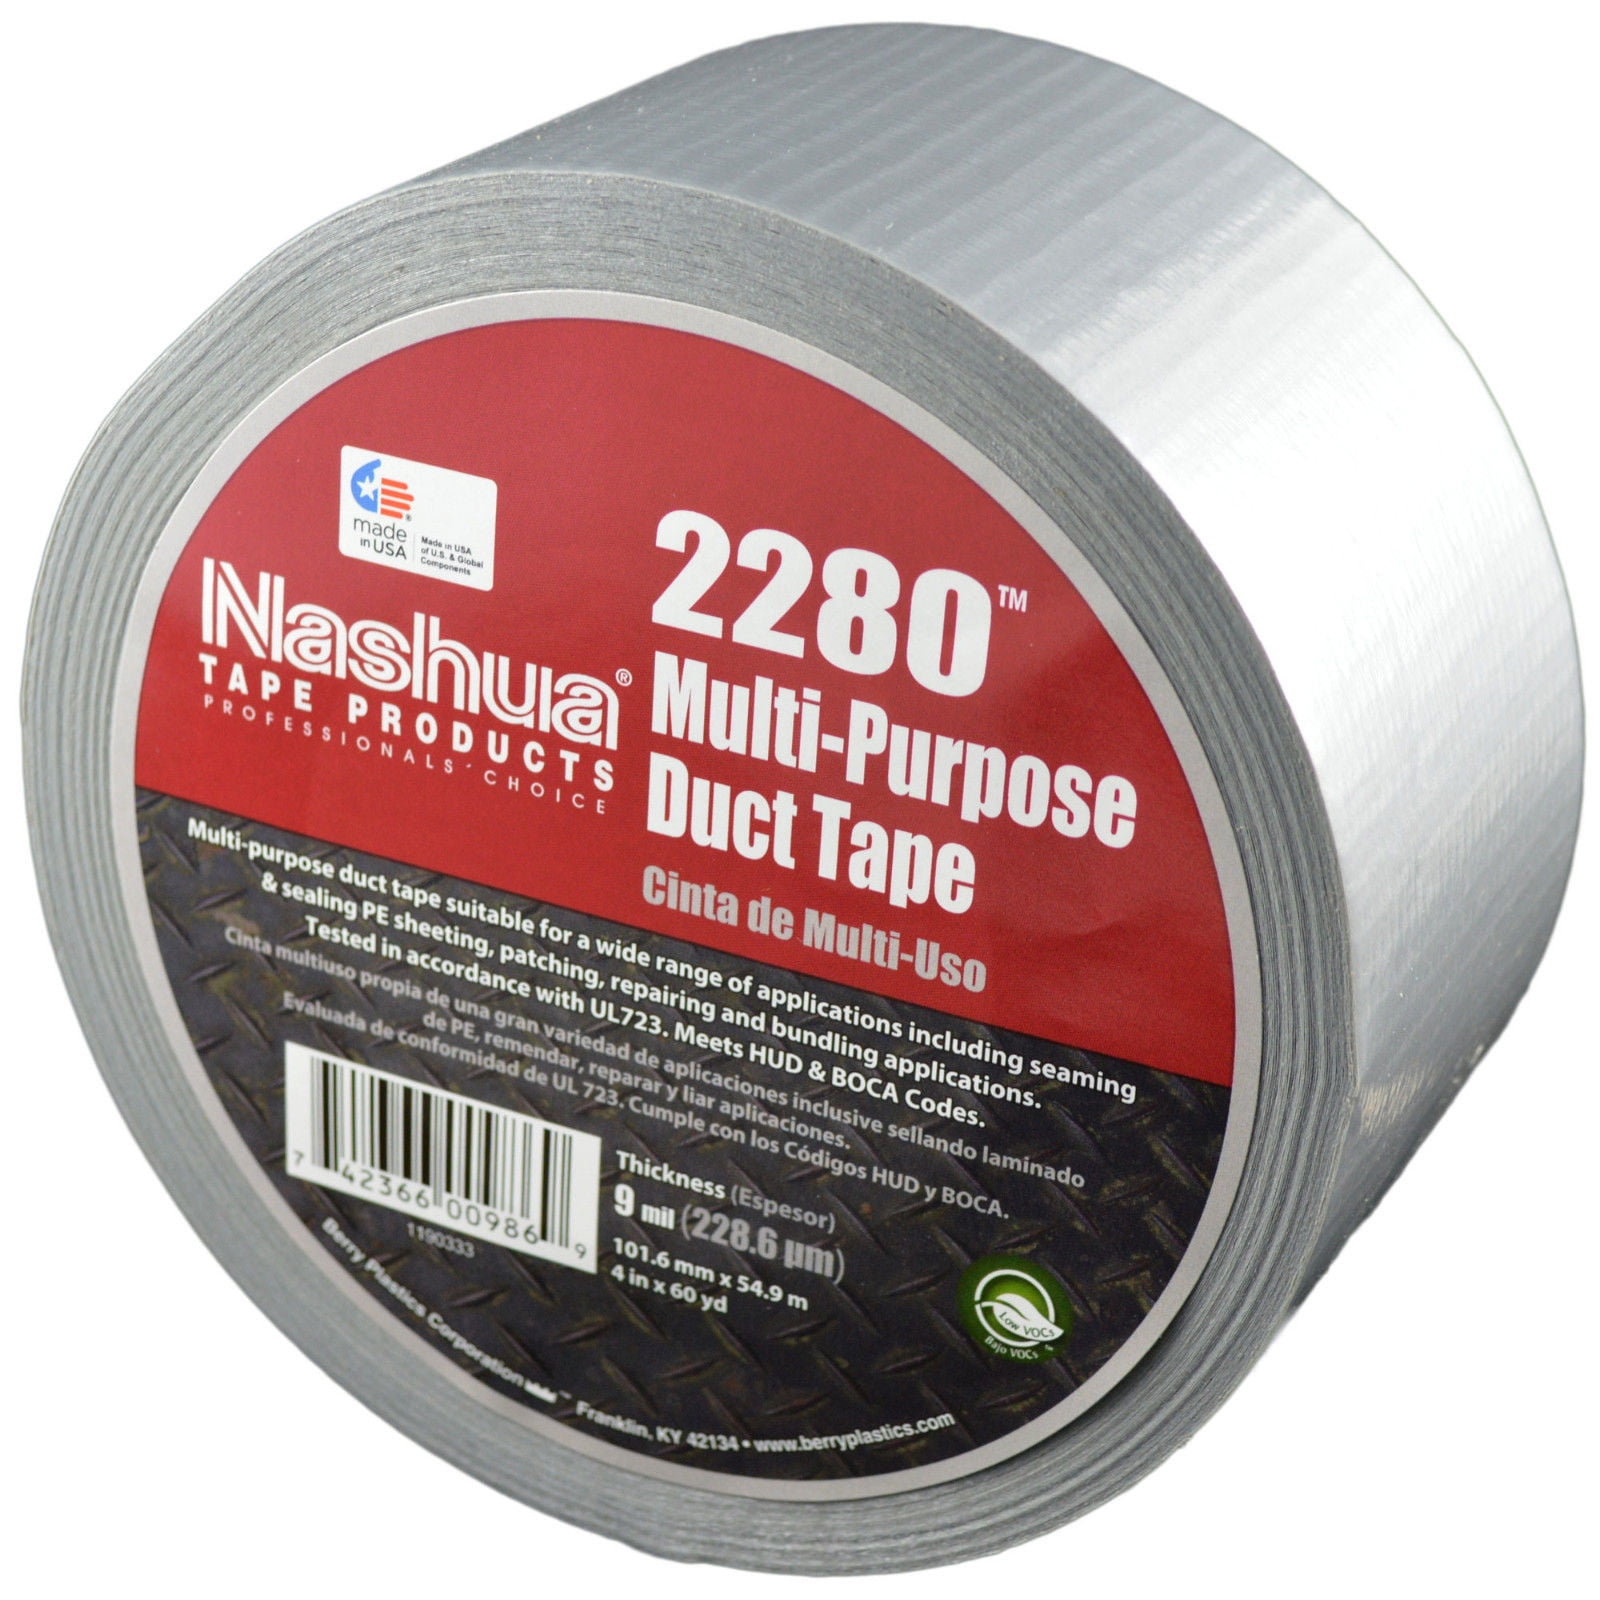 NASHUA 2280 Green Duct Tape Full Case of 16 Rolls 72mm x 55M 